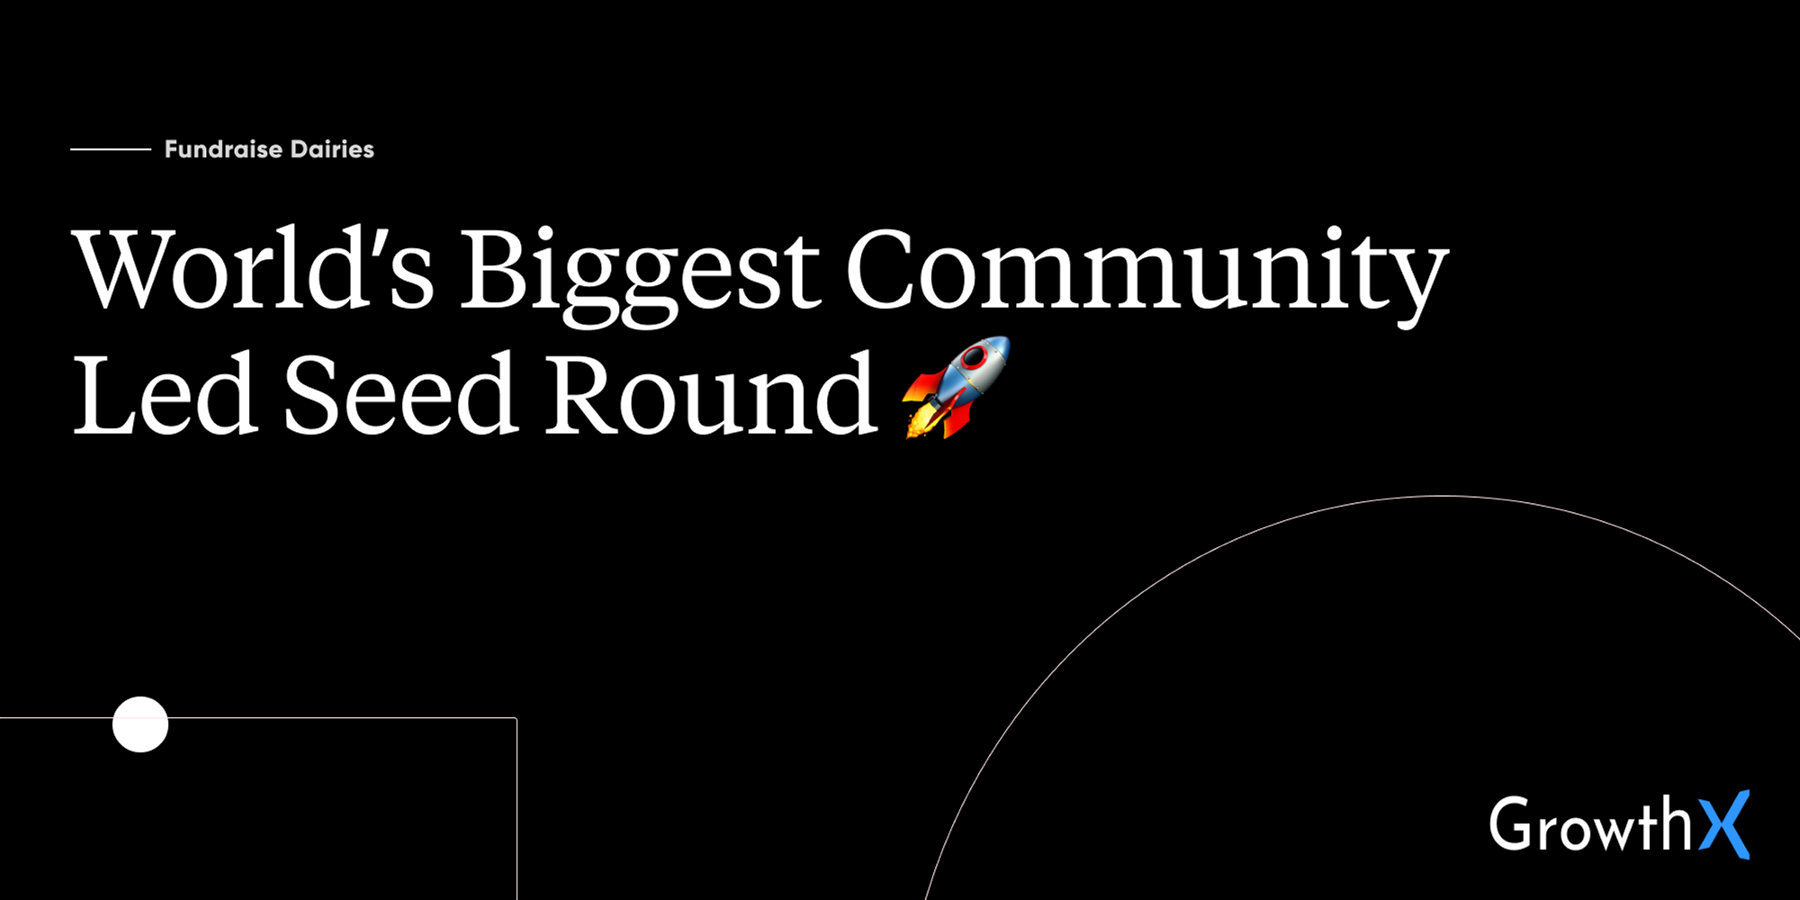 We've raised the largest community led seed round from 212 investors